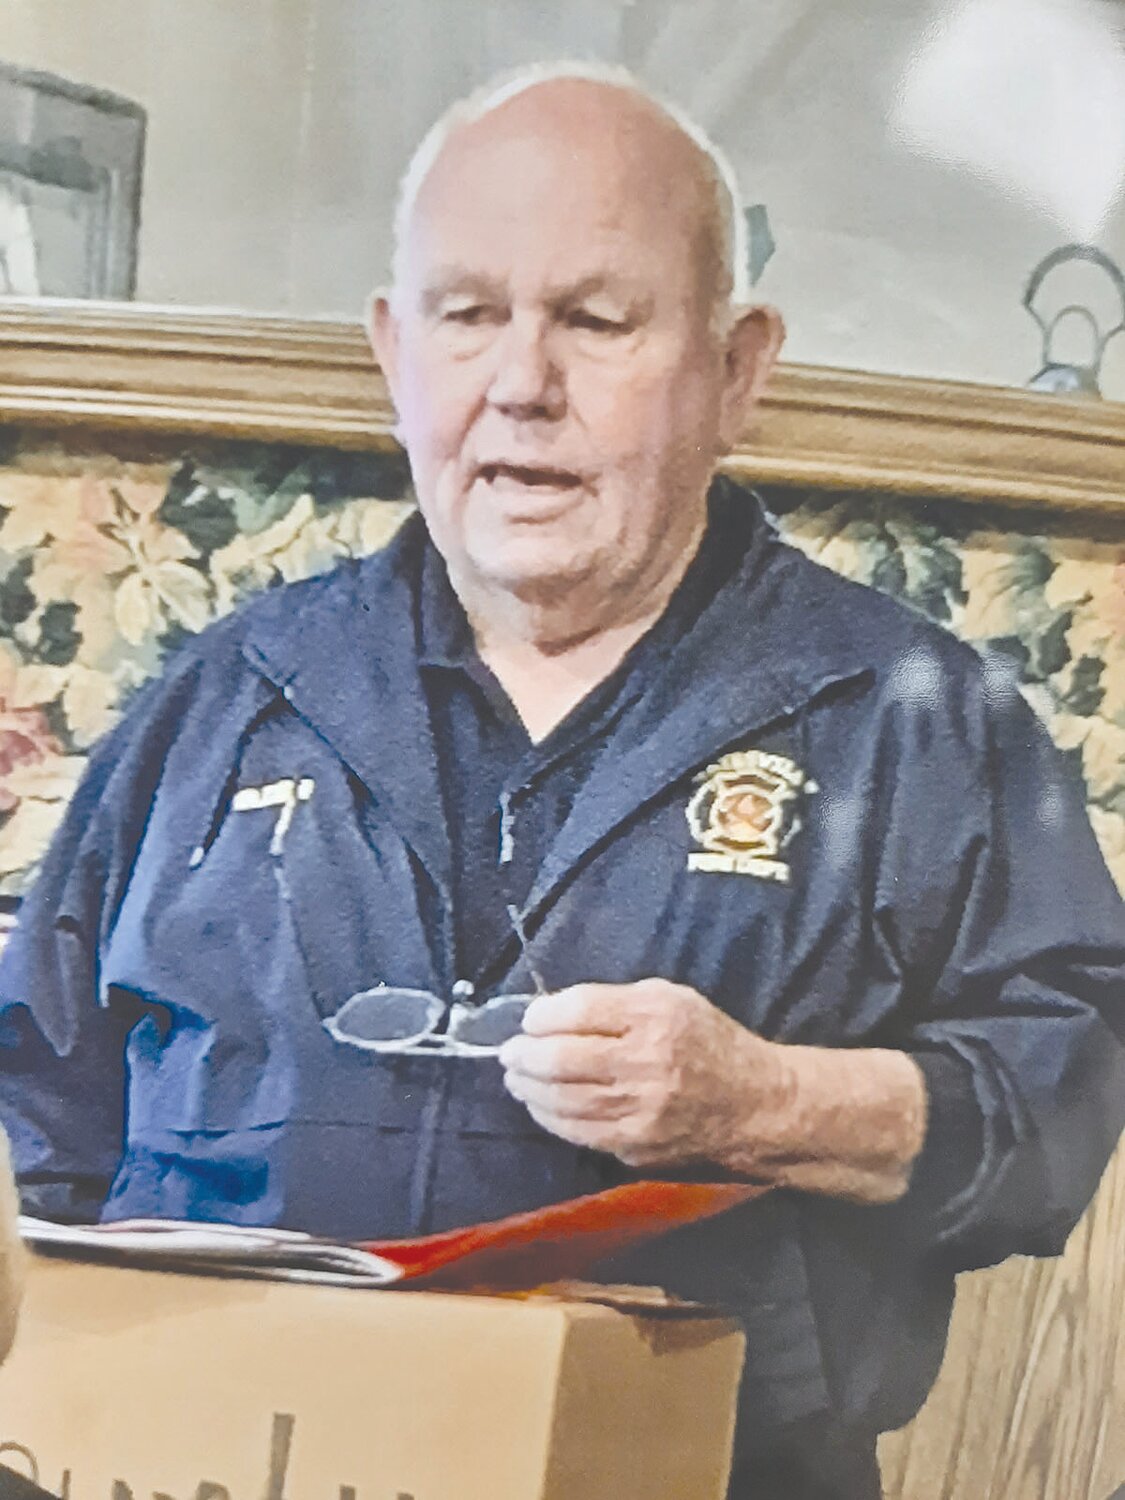 Billy Vaden has been with the Gatesville Fire Department since 1970 – 52 years of service. Vaden recently told the retired teachers gathering, “It’s the greatest job in the world. For all the bad things that may happen, it’s the good things you achieve that stay with you.”